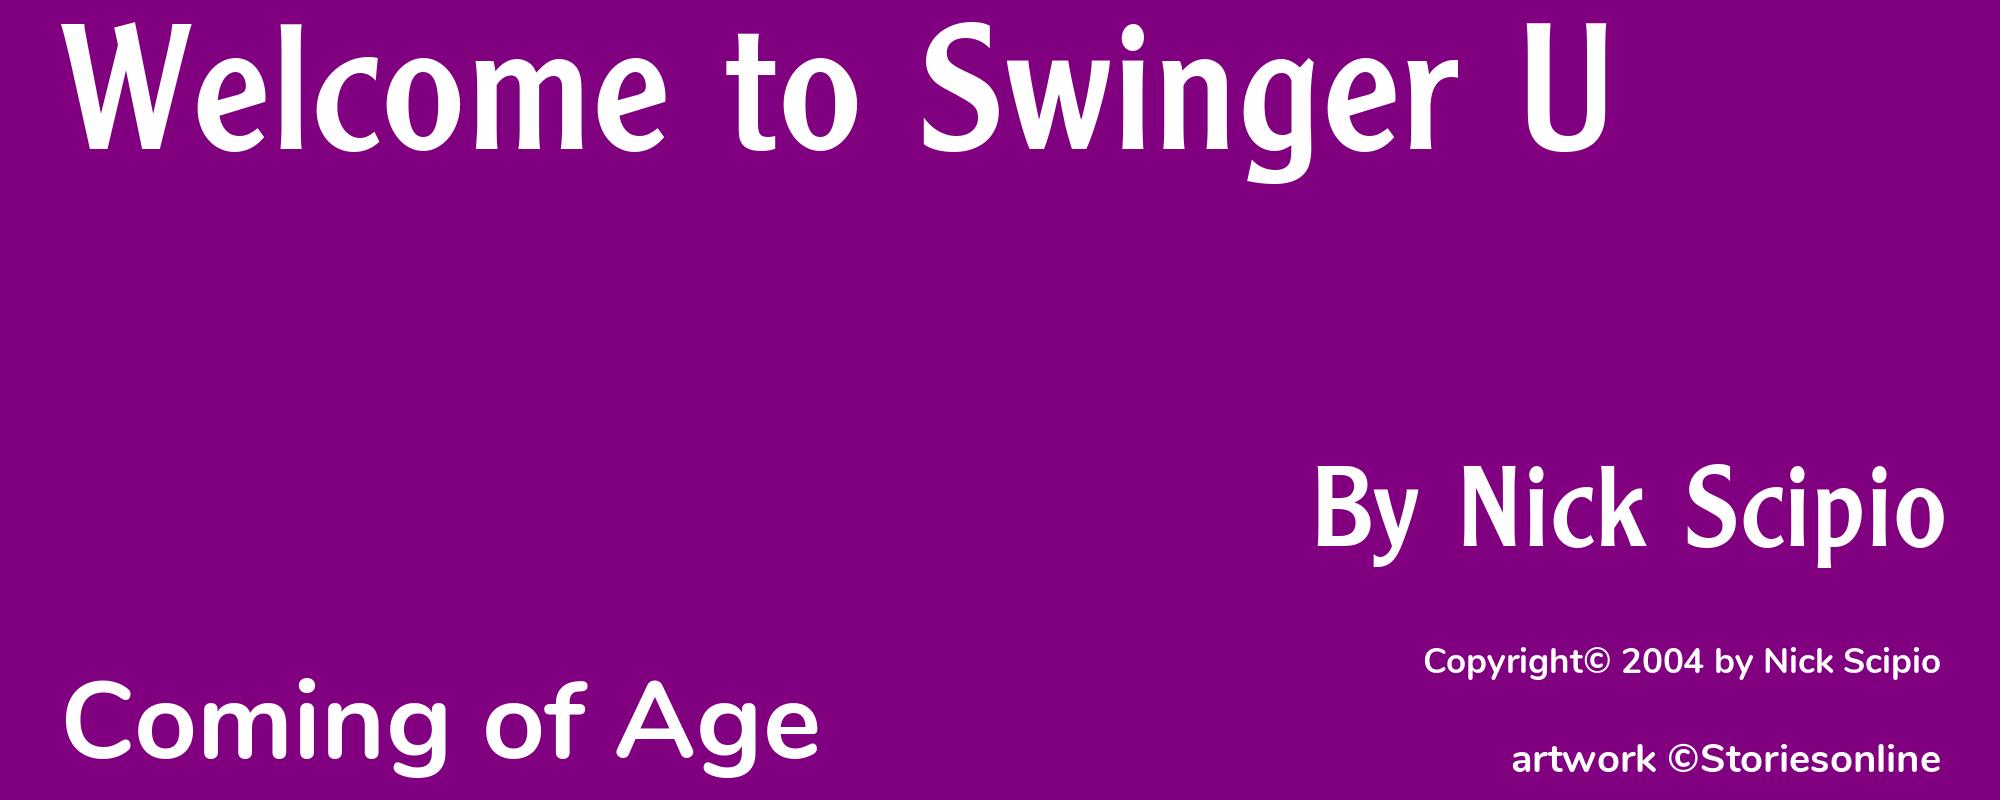 Welcome to Swinger U - Cover